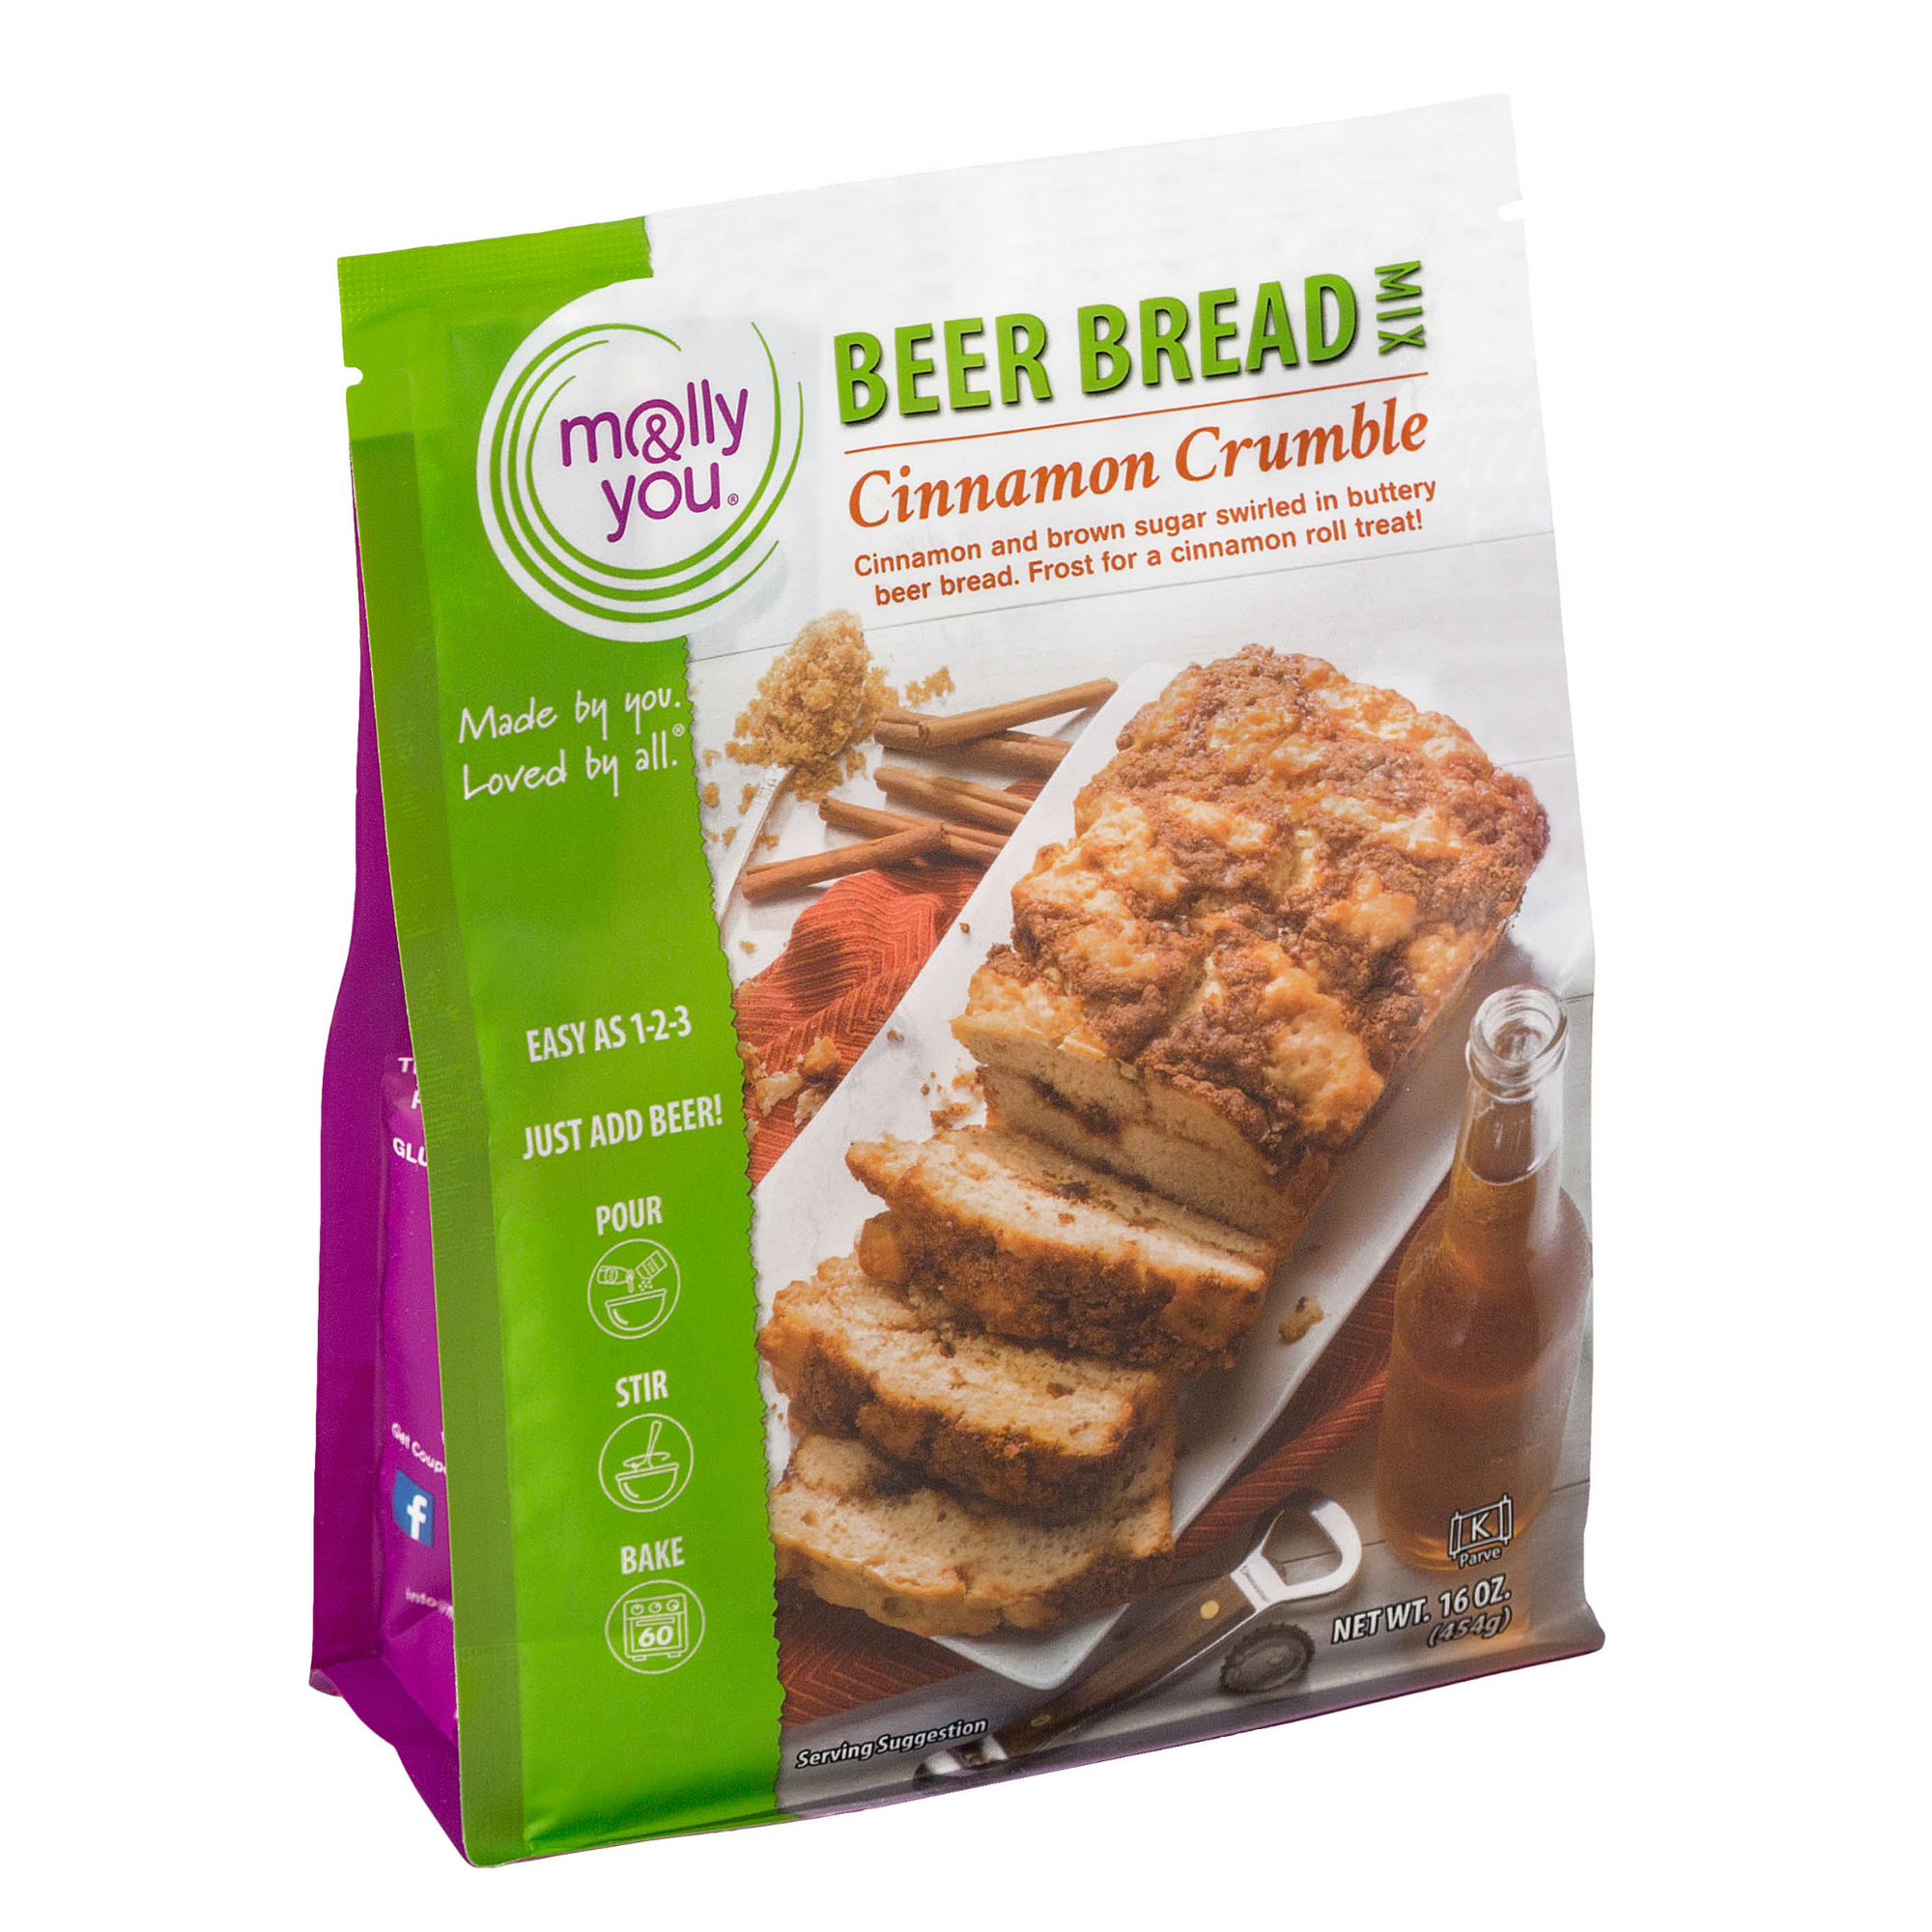 Front of the package - Cinnamon Crumble Beer Bread Mix